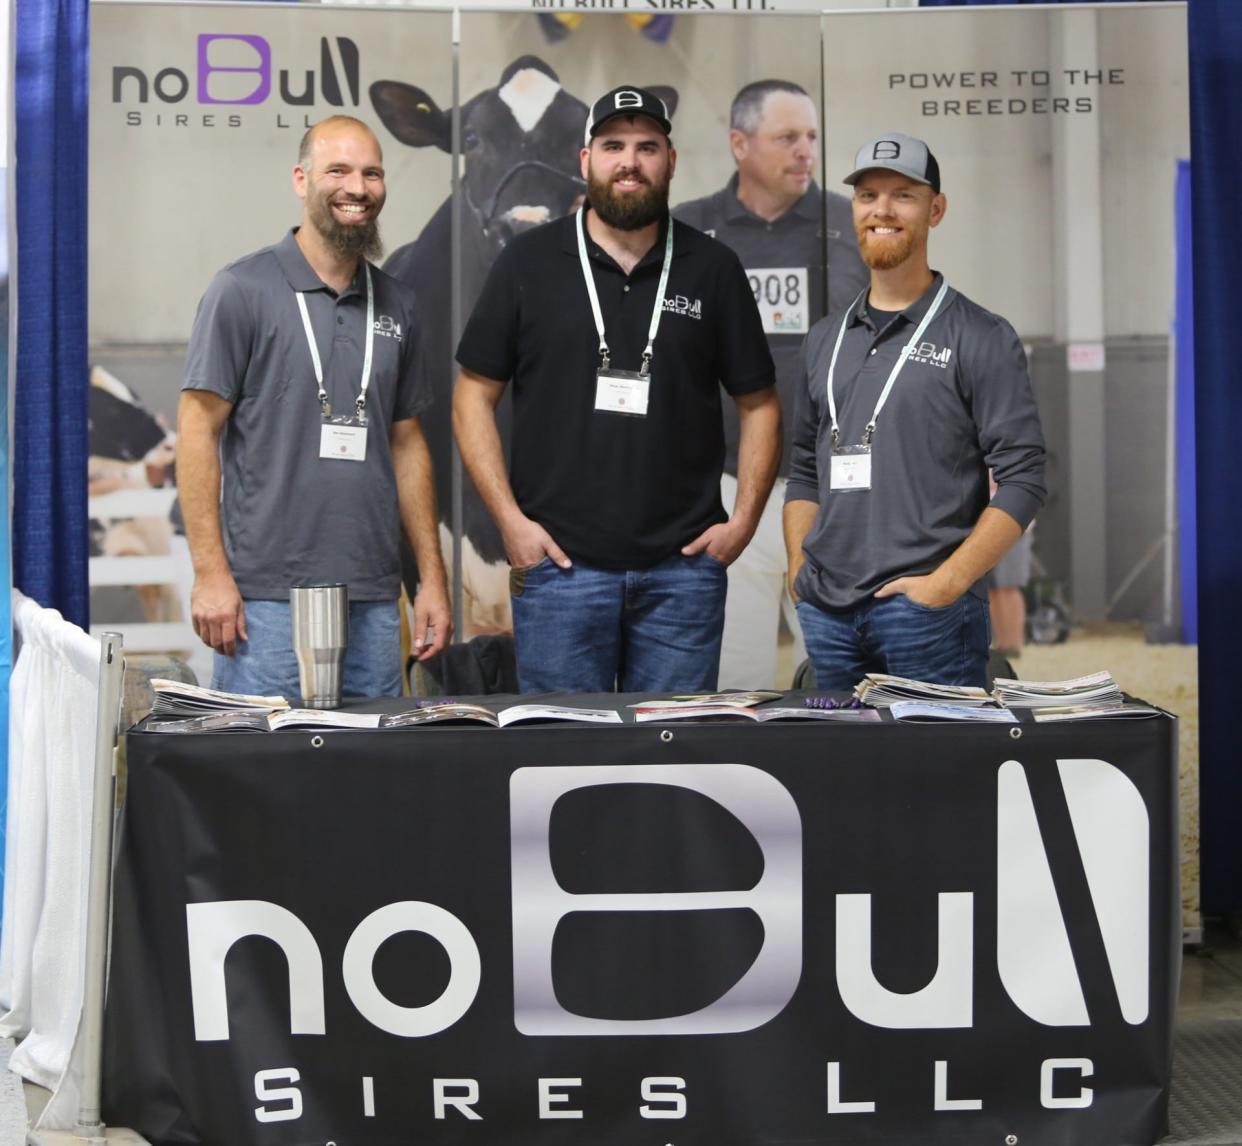 Ben Masemore, left, poses with Ethan Wentworth and Rusty Herr in front of the NoBull Sires logo. Wentworth and Herr have been jailed for practicing veterinary medicine without a license, which has become a cause among small farmers in central Pennsylvania.